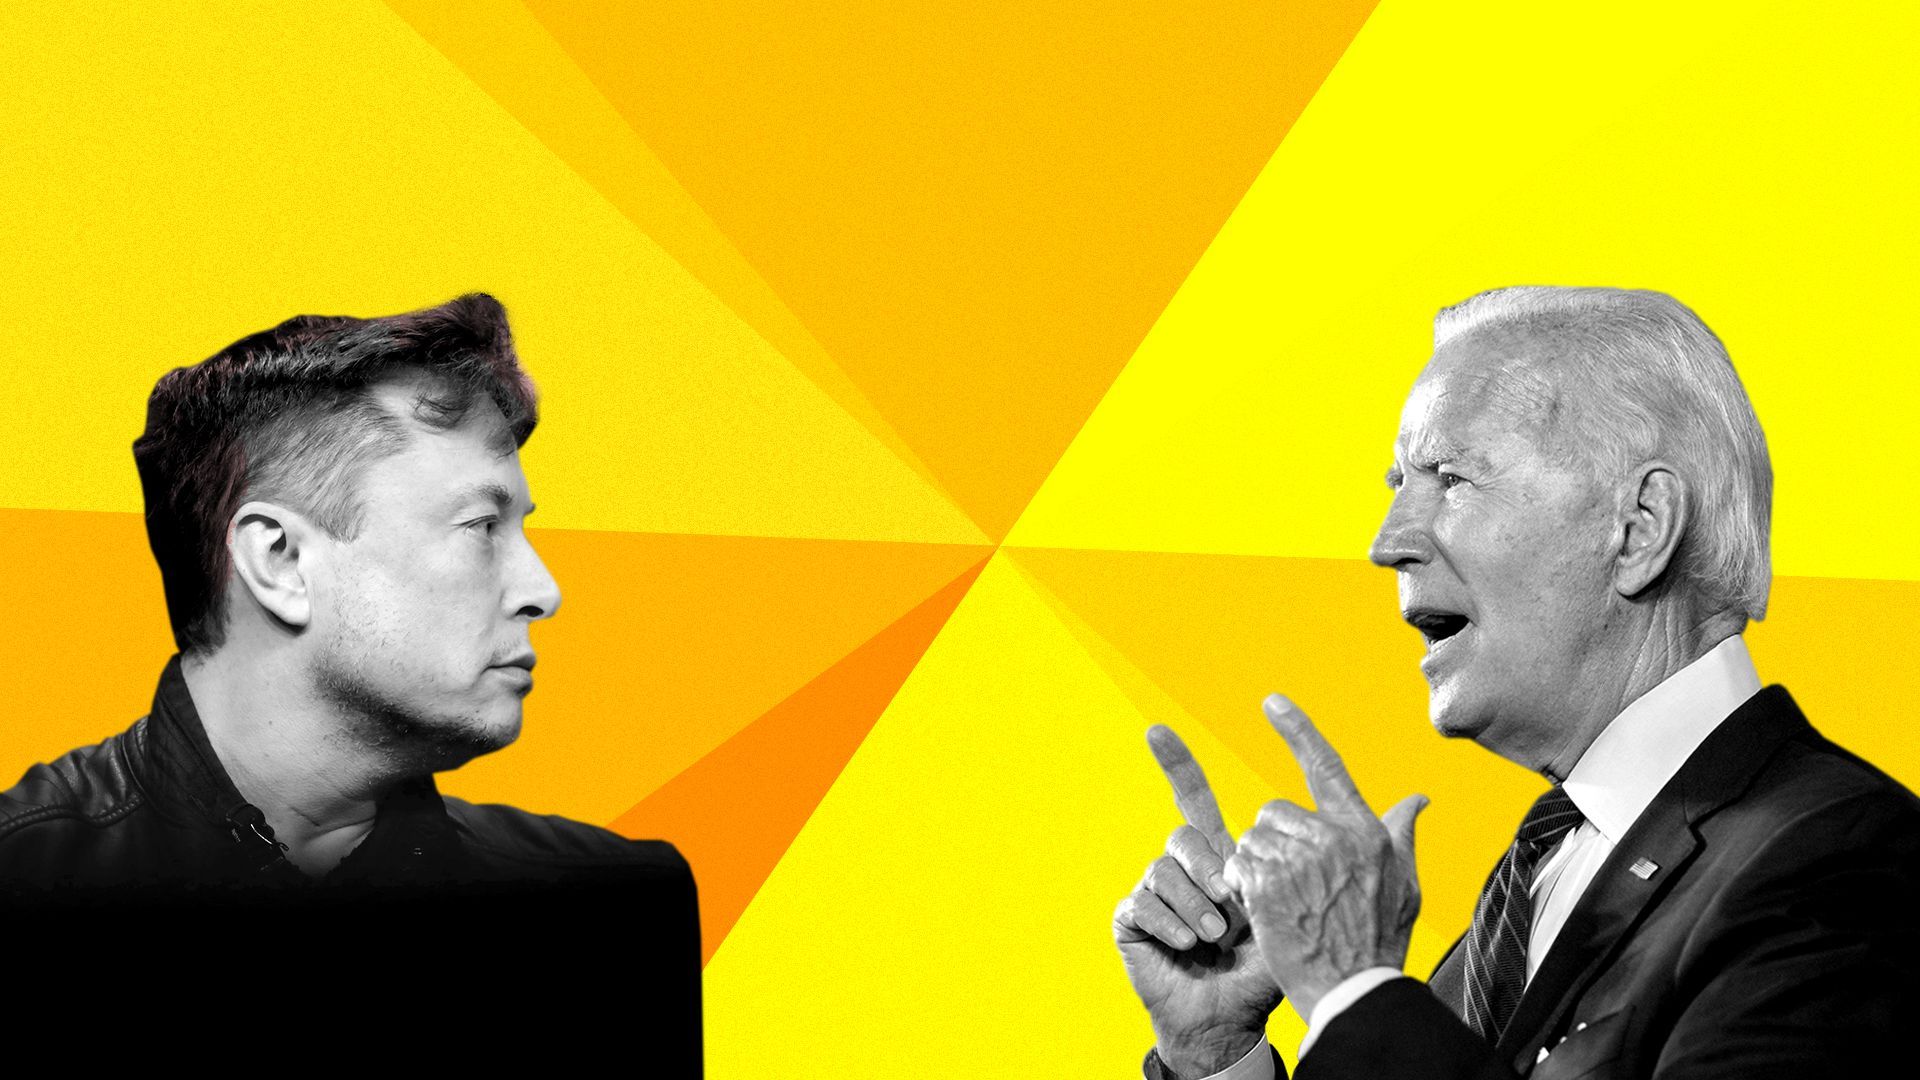 Photo illustration of Elon Musk and Joe Biden facing each other with a colorful background